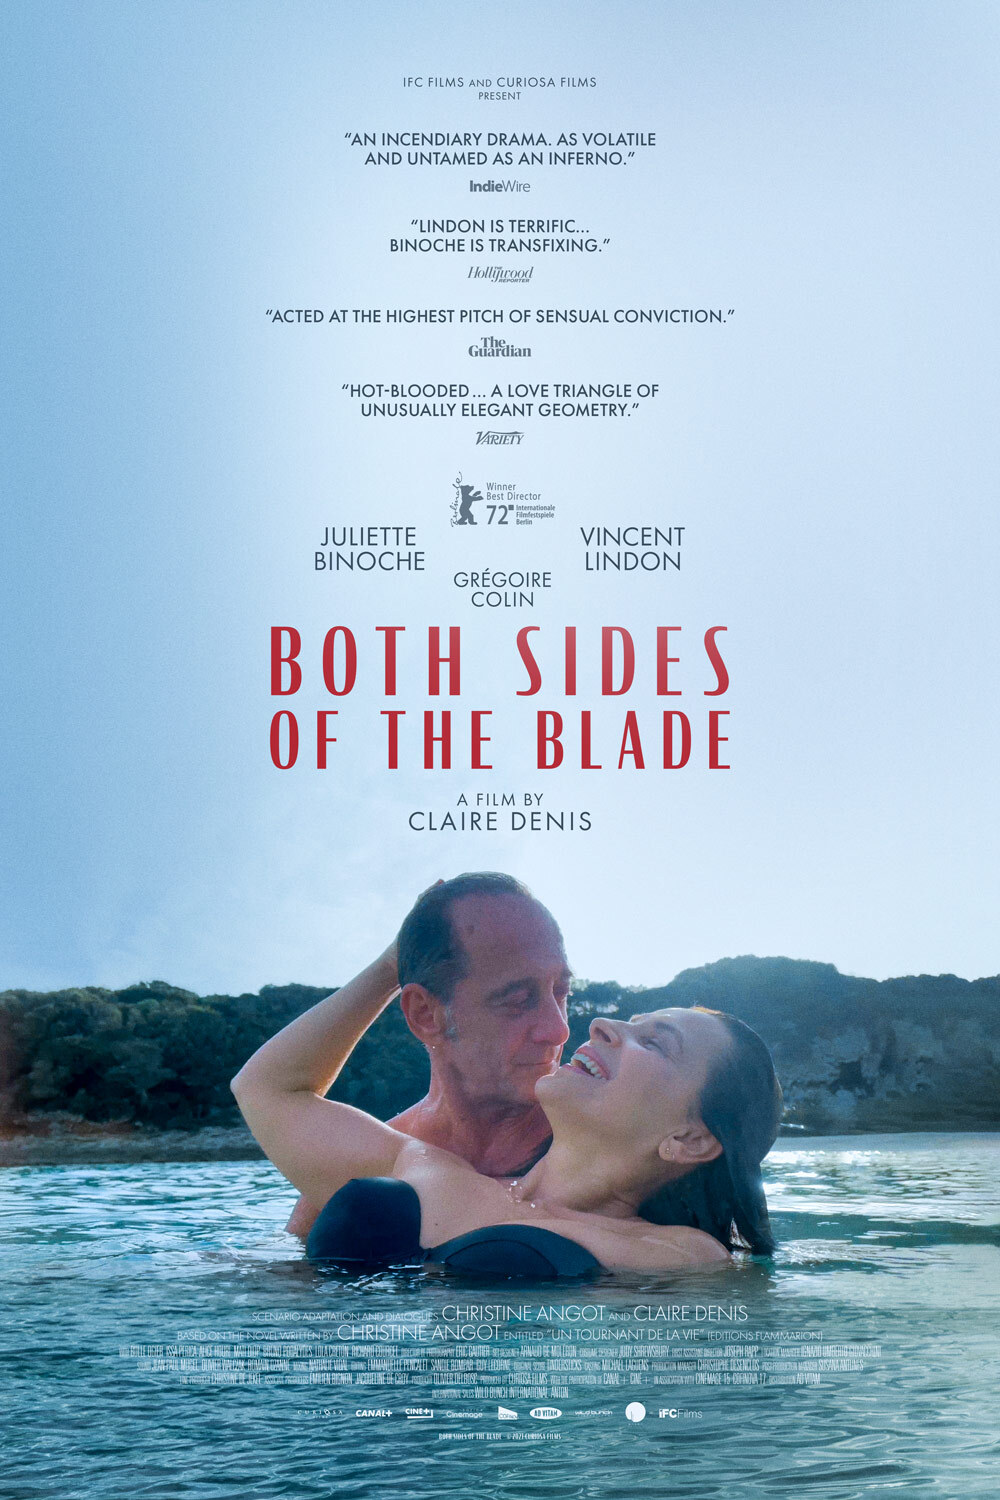 Movie poster for Both Sides of the Blade, man and woman swimming